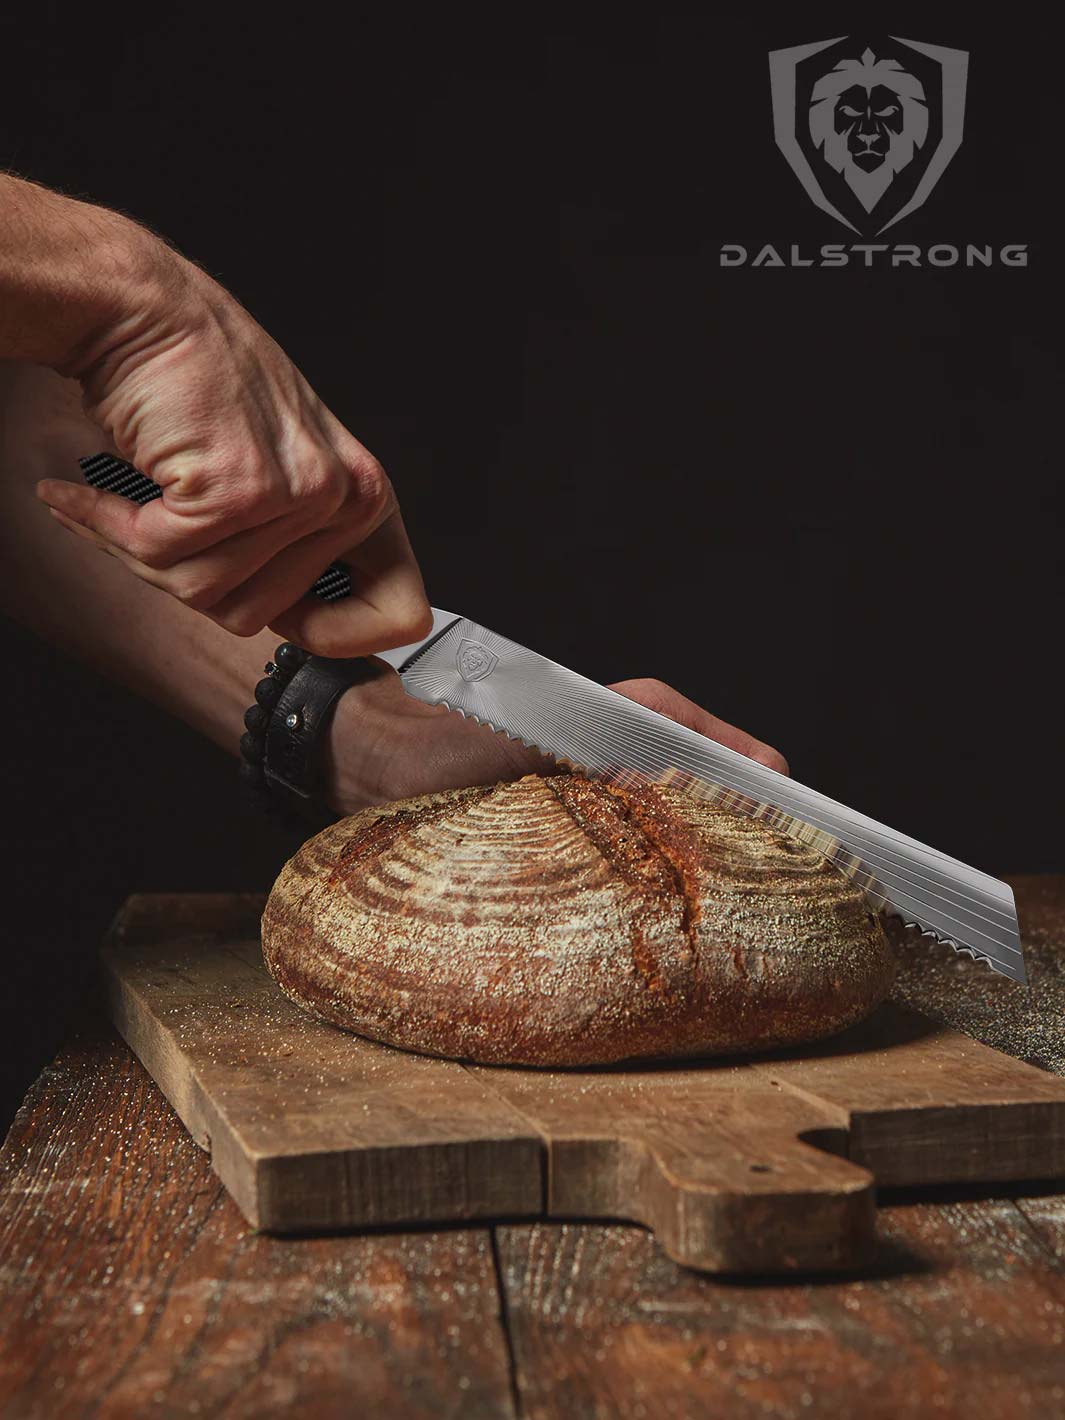 Dalstrong quantum 1 series 9 inch bread knife with dragon skin handle and a whole bread on a cutting board.